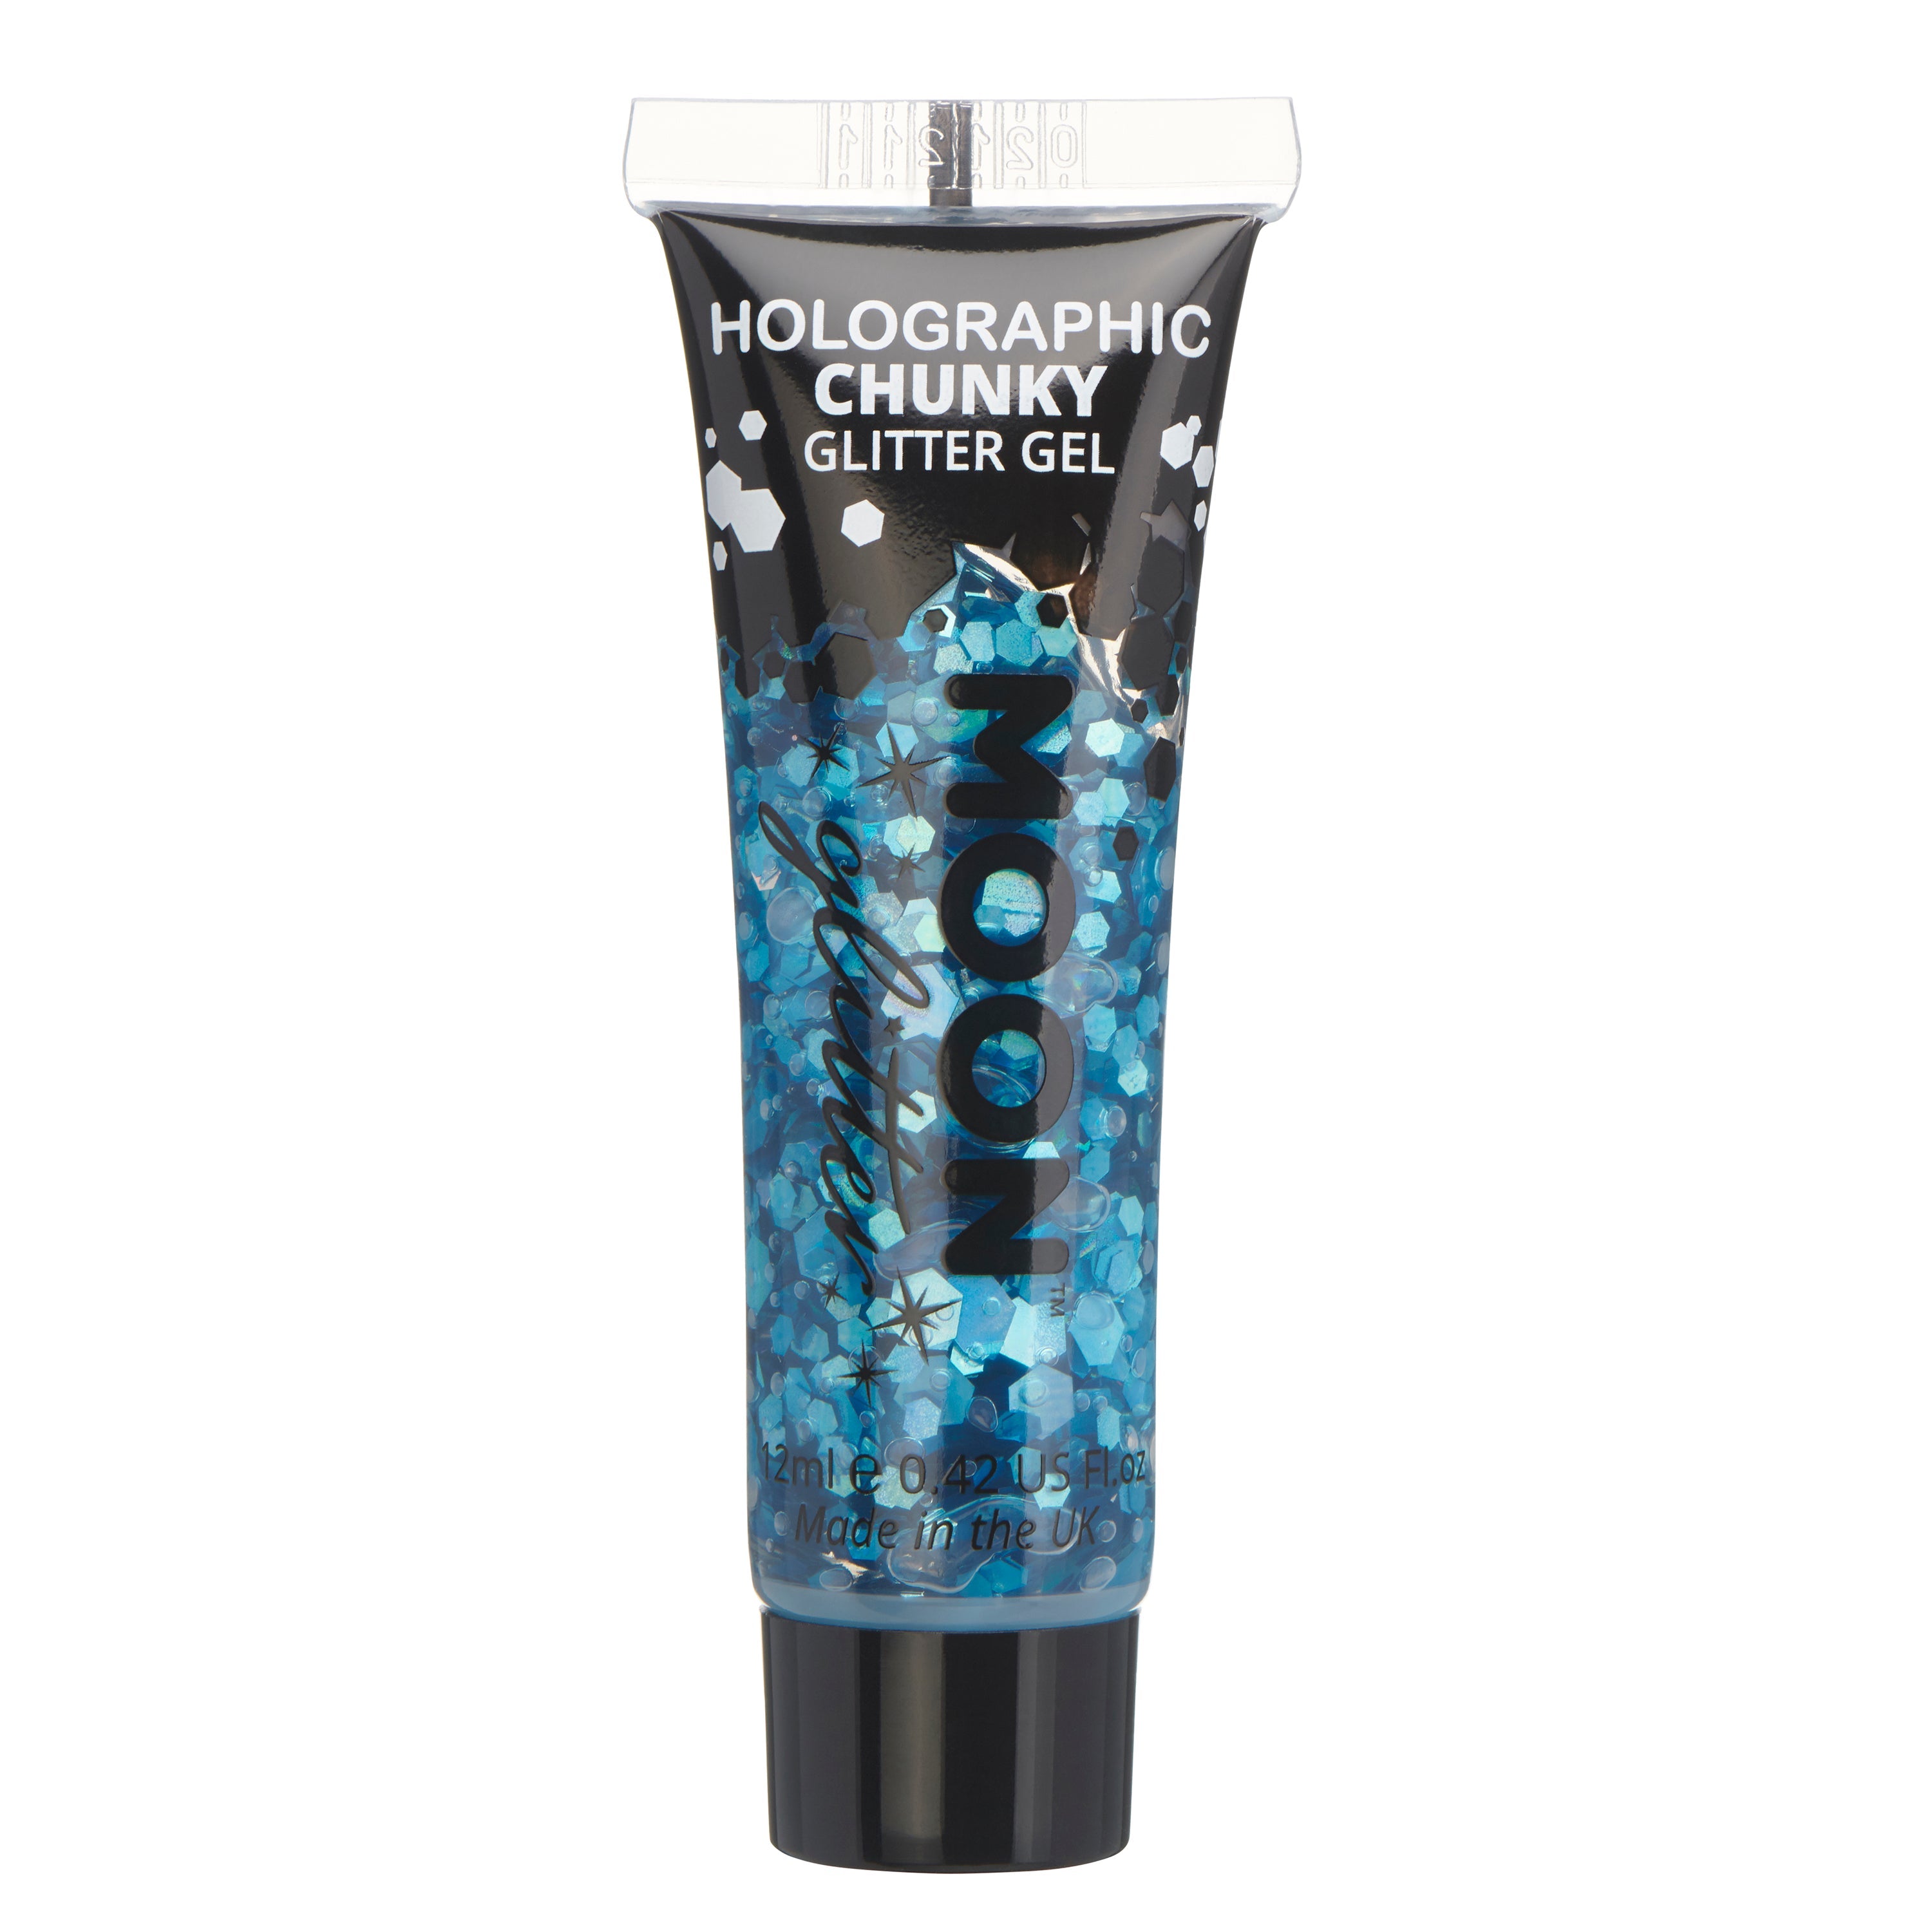 Blue - Holographic Chunky Face & Body Glitter Gel, 12mL. Cosmetically certified, FDA & Health Canada compliant, cruelty free and vegan.